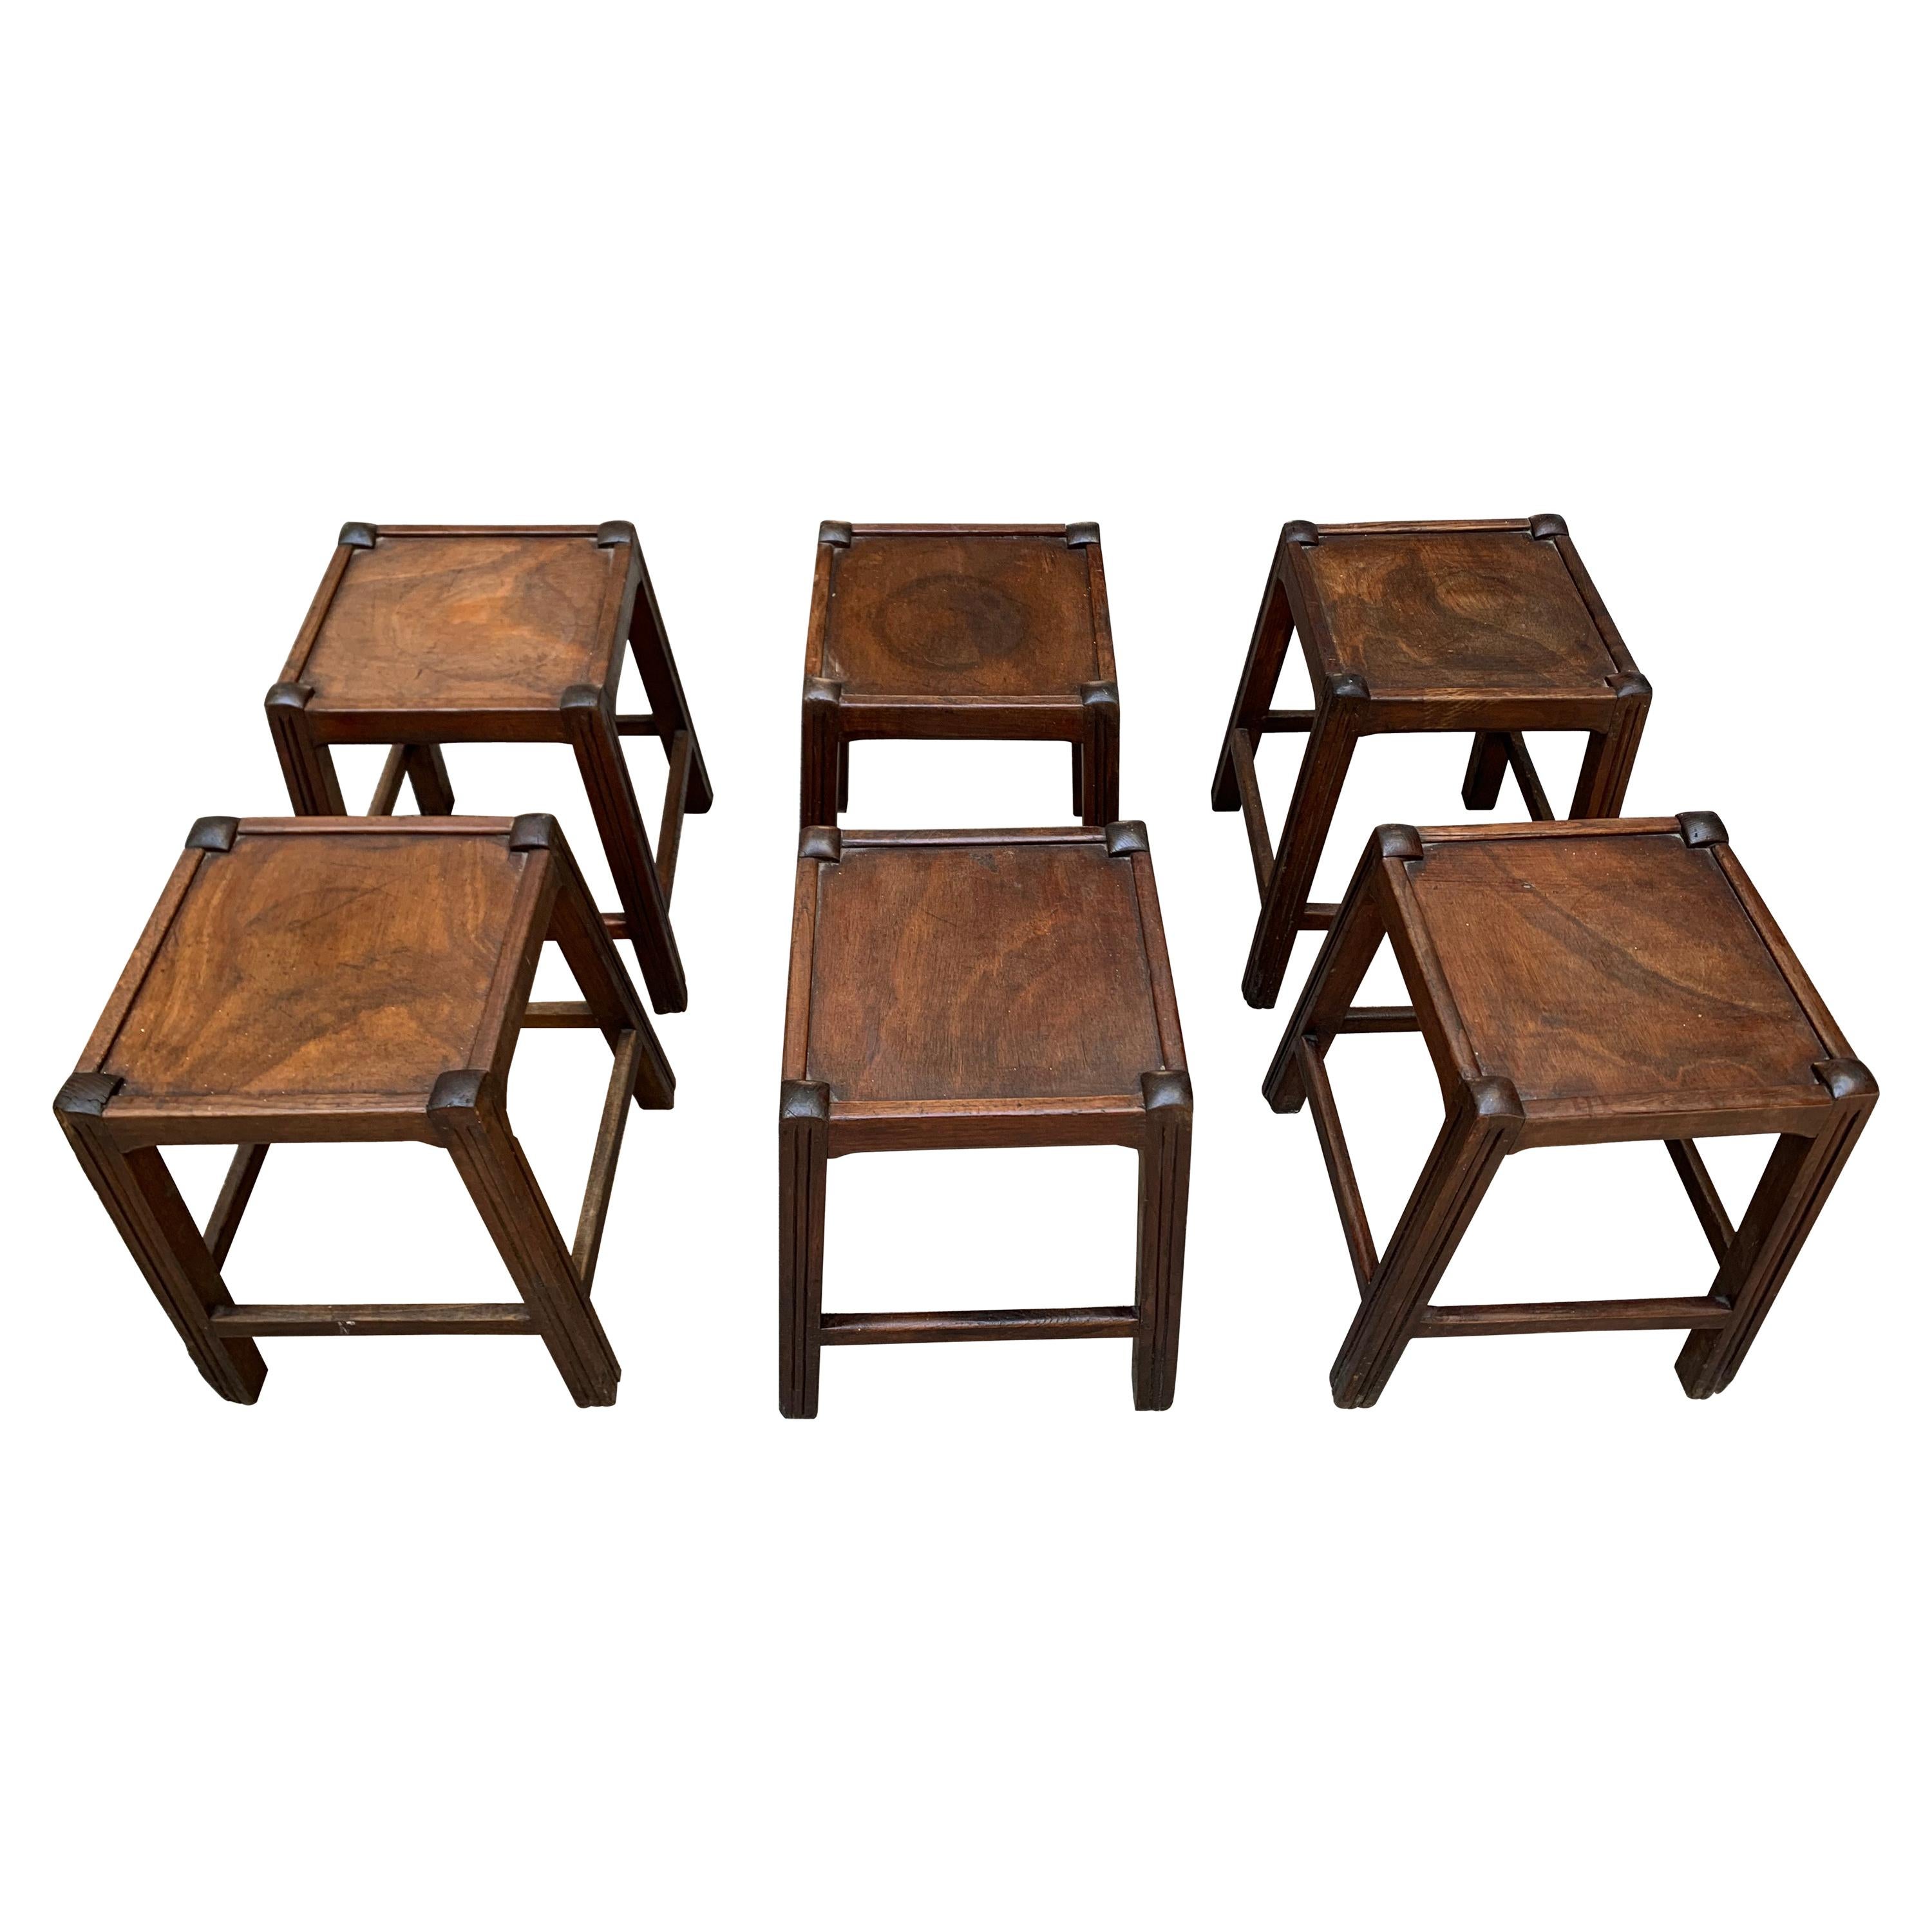 6 Stools for the Resort of Les Arcs